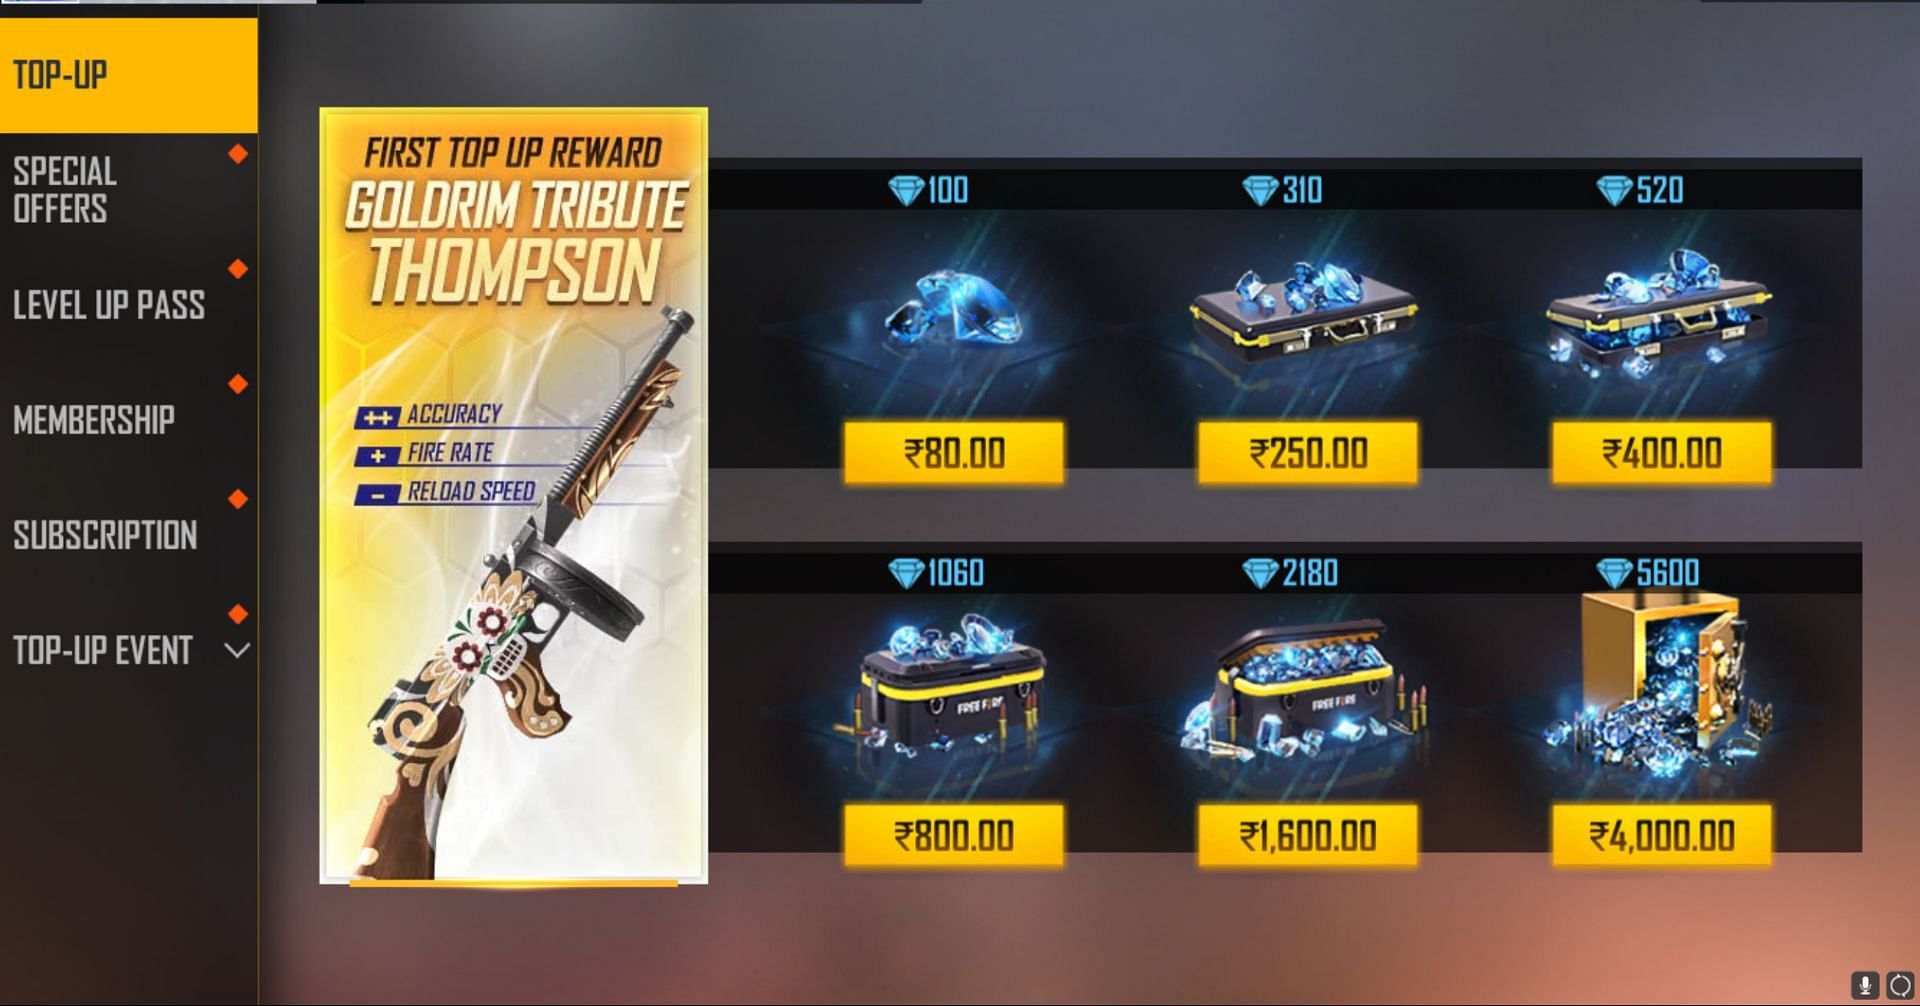 The currency can be purchased by the players using the desired payment method (Image via Garena)